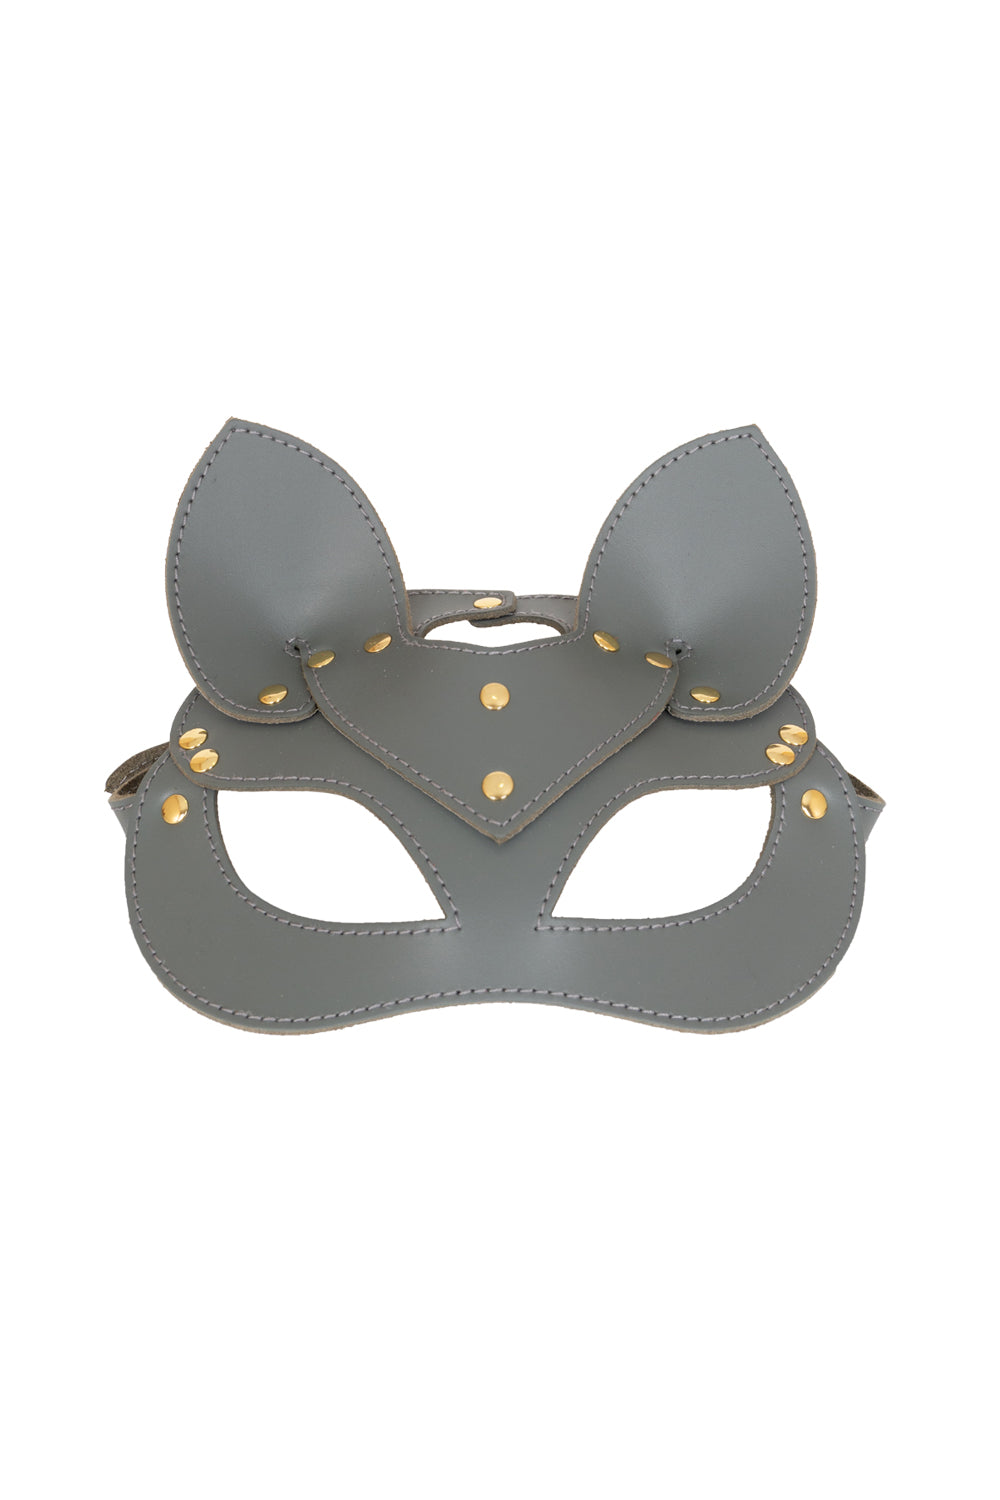 Leather сat mask, kitty fetish mask. Gray